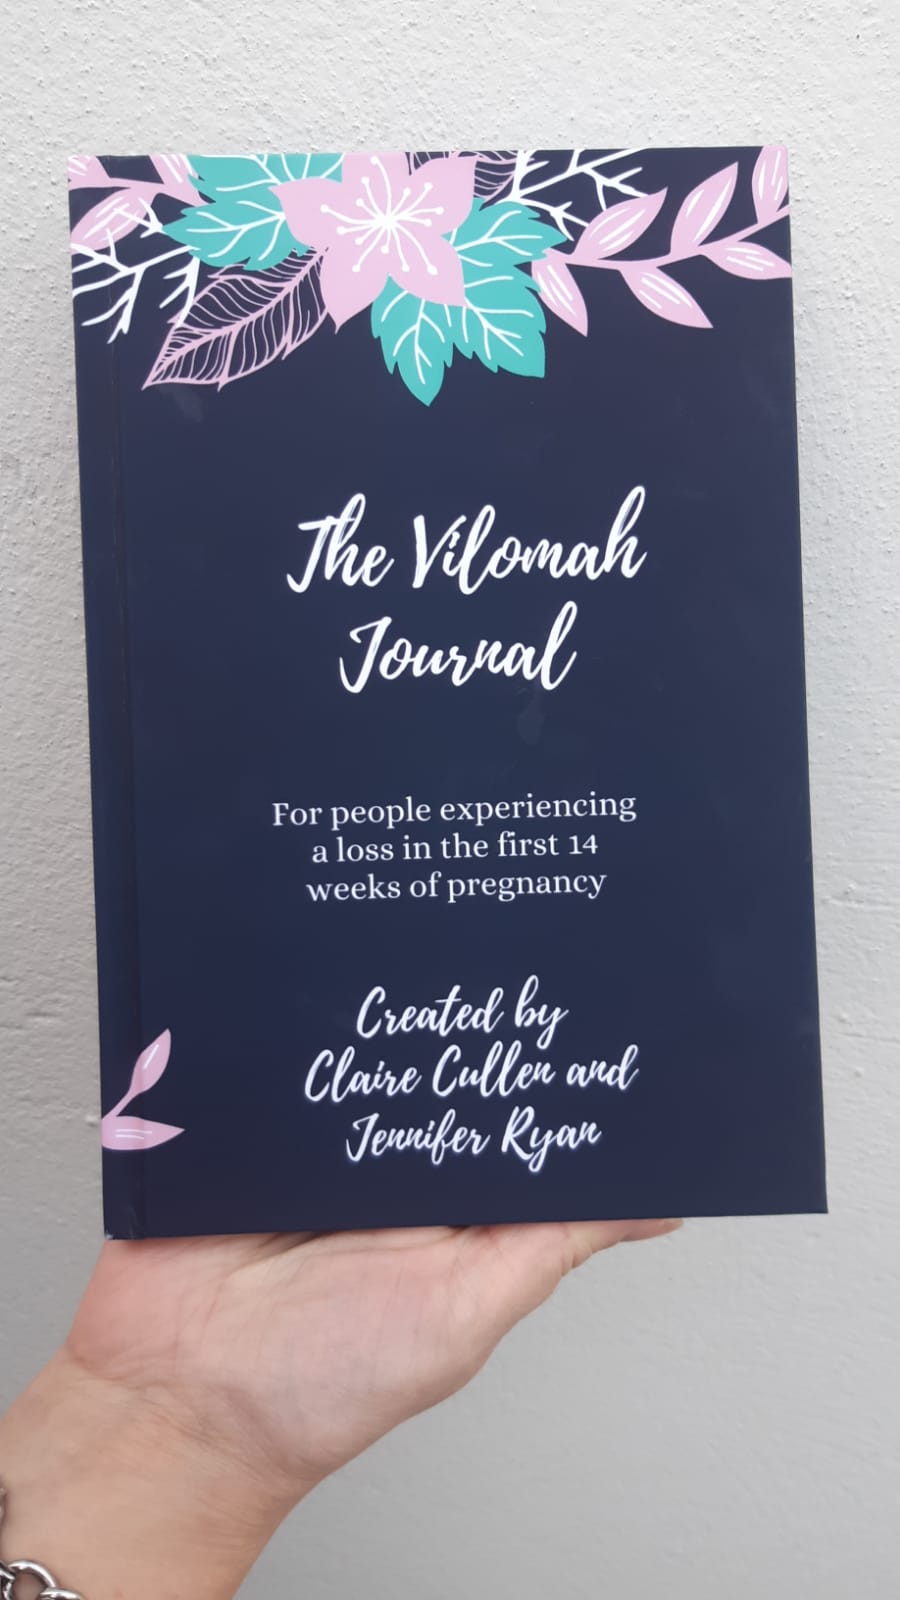 The Vilomah Pregnancy Loss Digital Download Journal: For people experiencing a loss in pregnancy up to 14 weeks